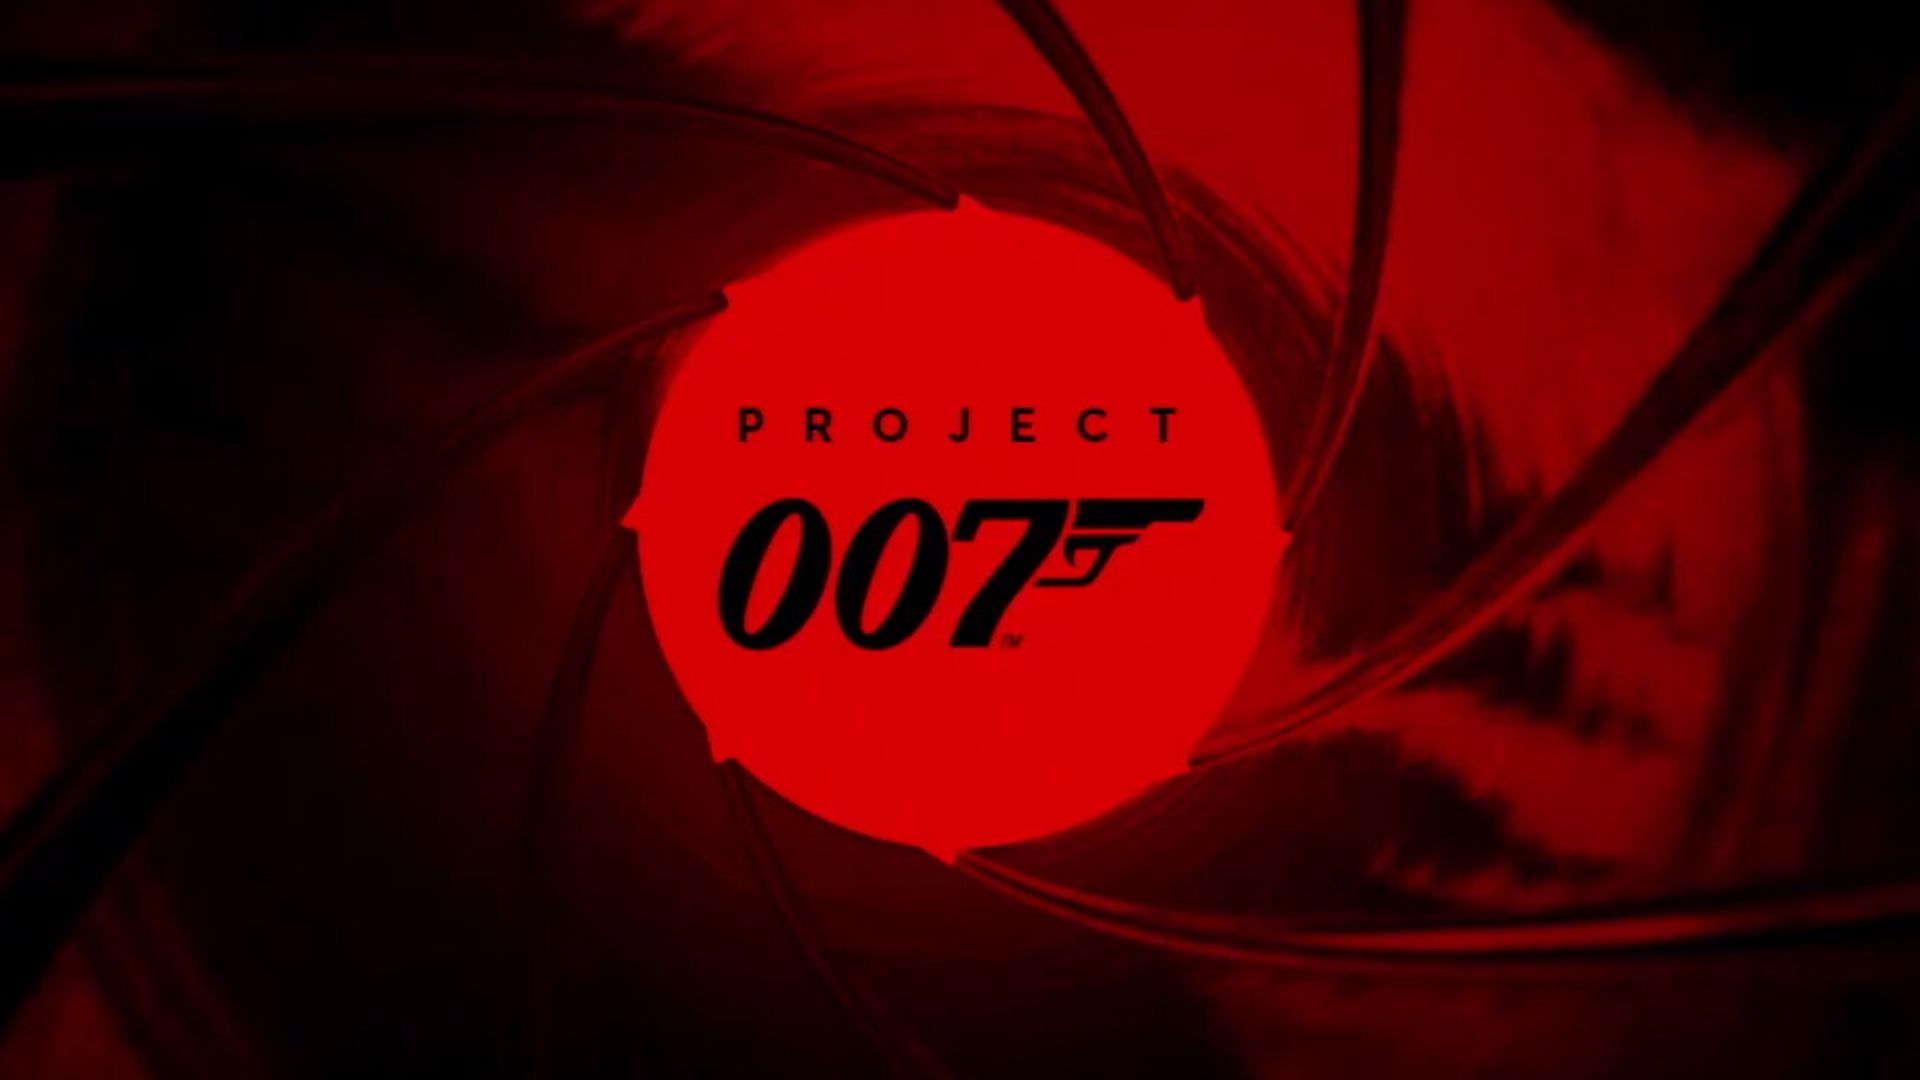 Project 007 & Project Dragon To Not Release Before March 2025